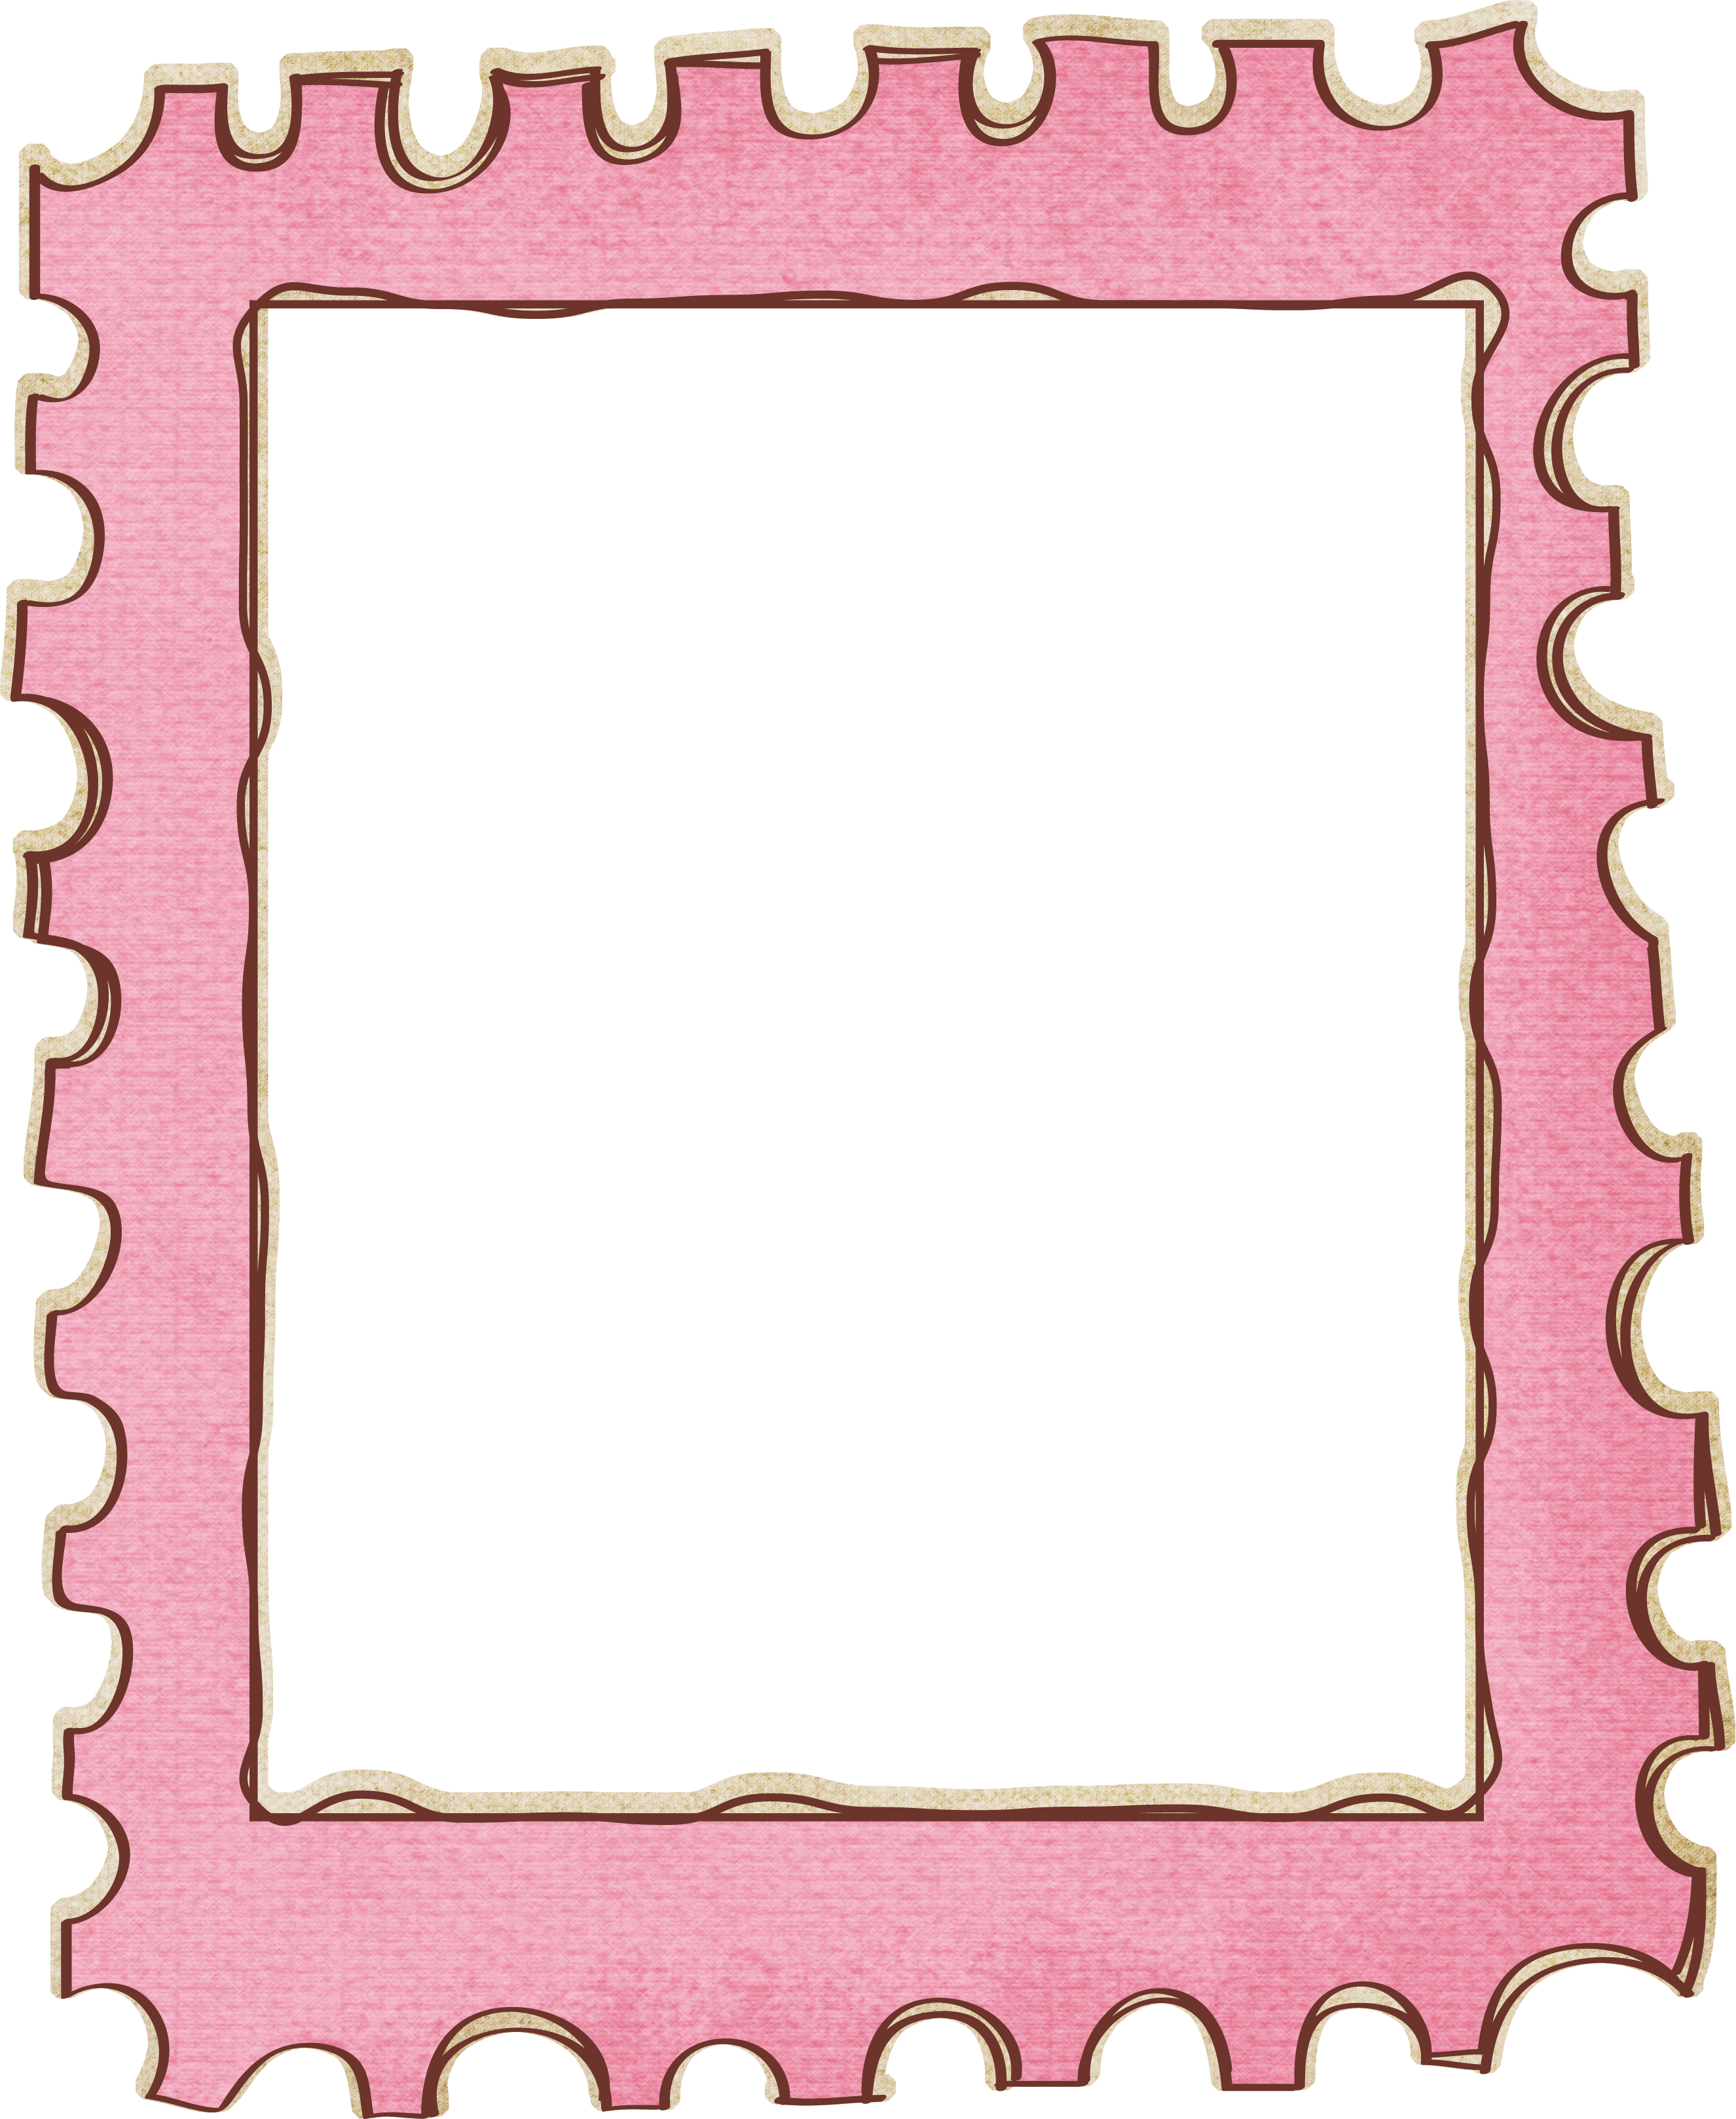 Cute frame png. Postage stamp picture wallpaper